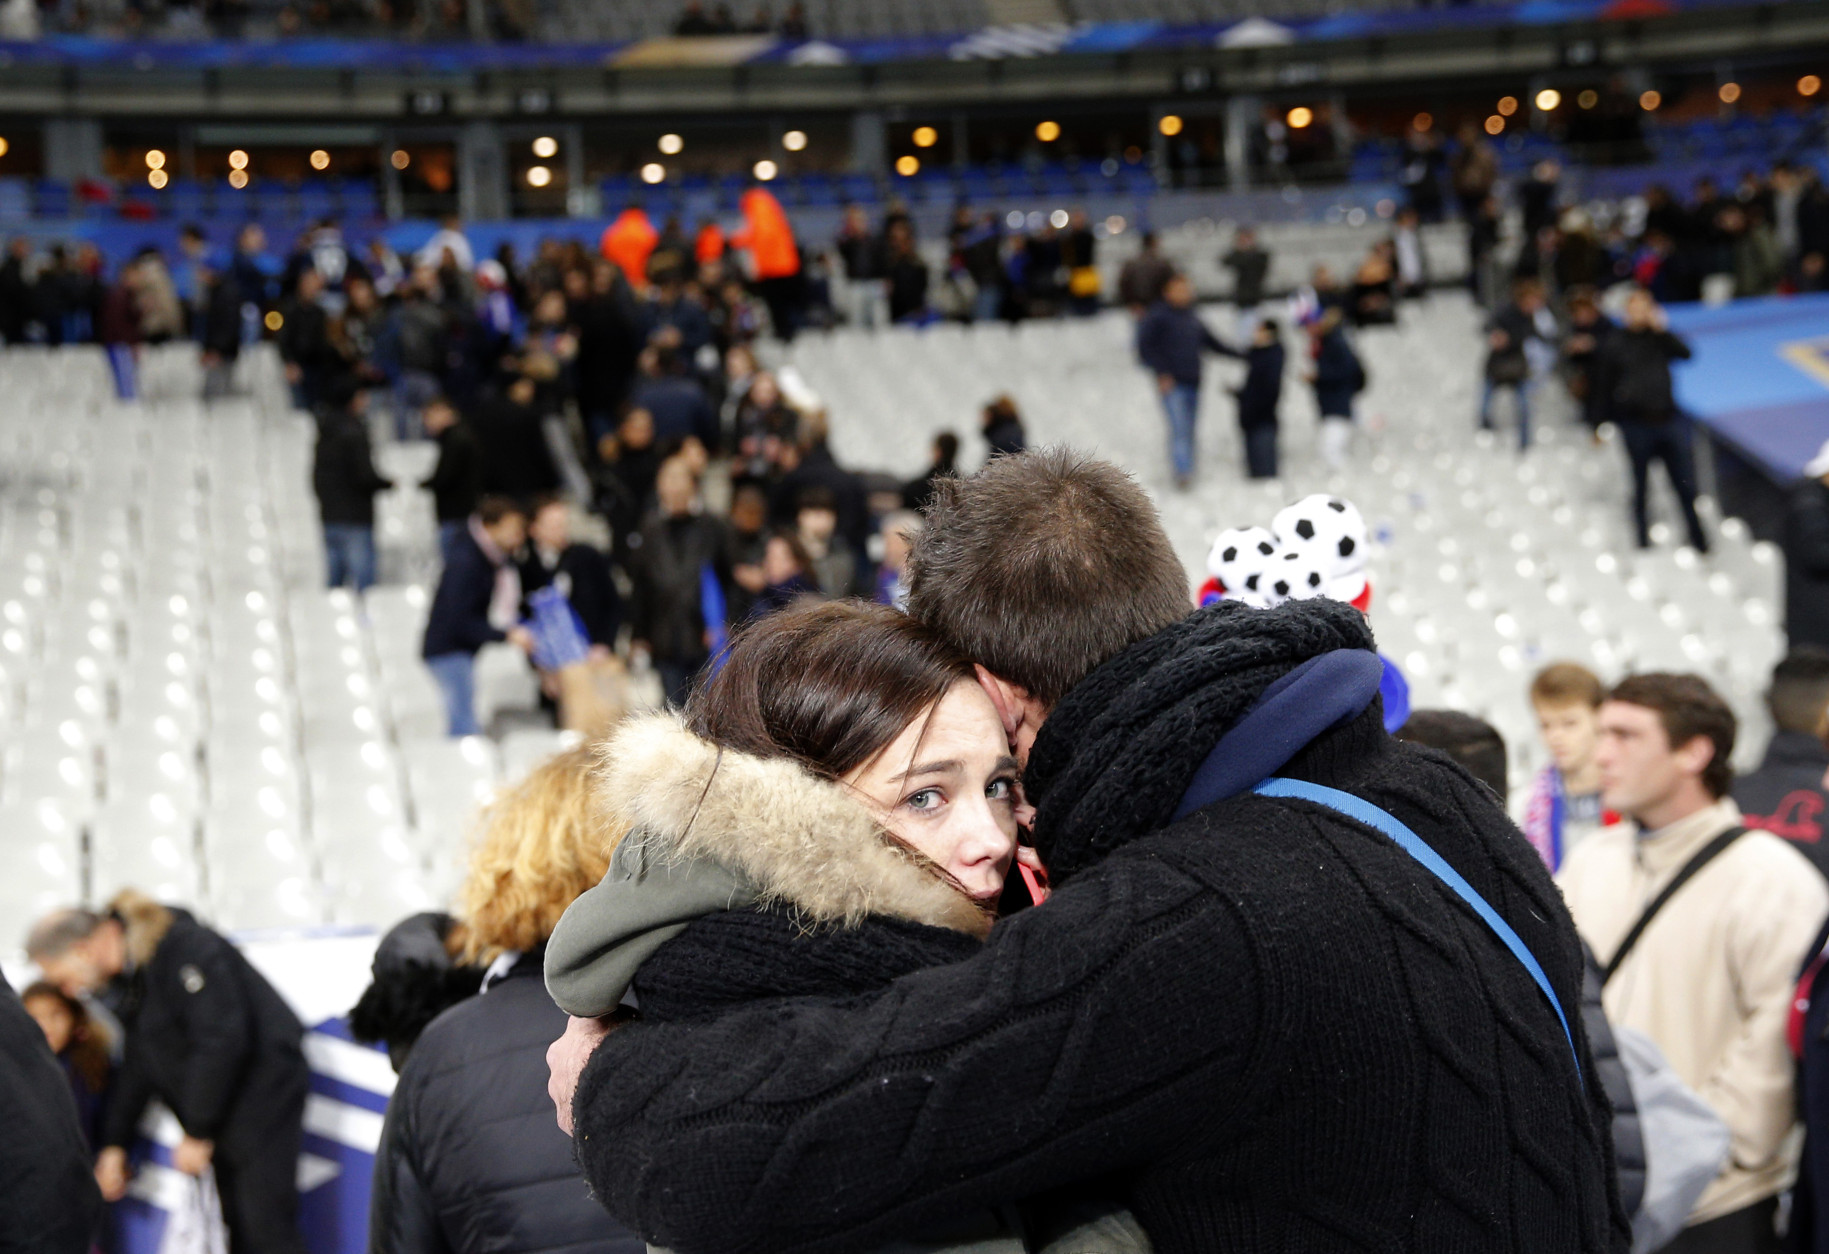 Spectators embrace each other as they stand on the playing field of the Stade de France stadium at the end of a friendly soccer match between France and Germany in Saint Denis, outside Paris, Friday, Nov. 13, 2015. Hundreds made their way to the pitch after explosions were heard nearby. Multiple fatal attacks throughout the city have prompted President Francois Hollande to announce he was closing the country's borders and declaring a state of emergency. (AP Photo/Christophe Ena)